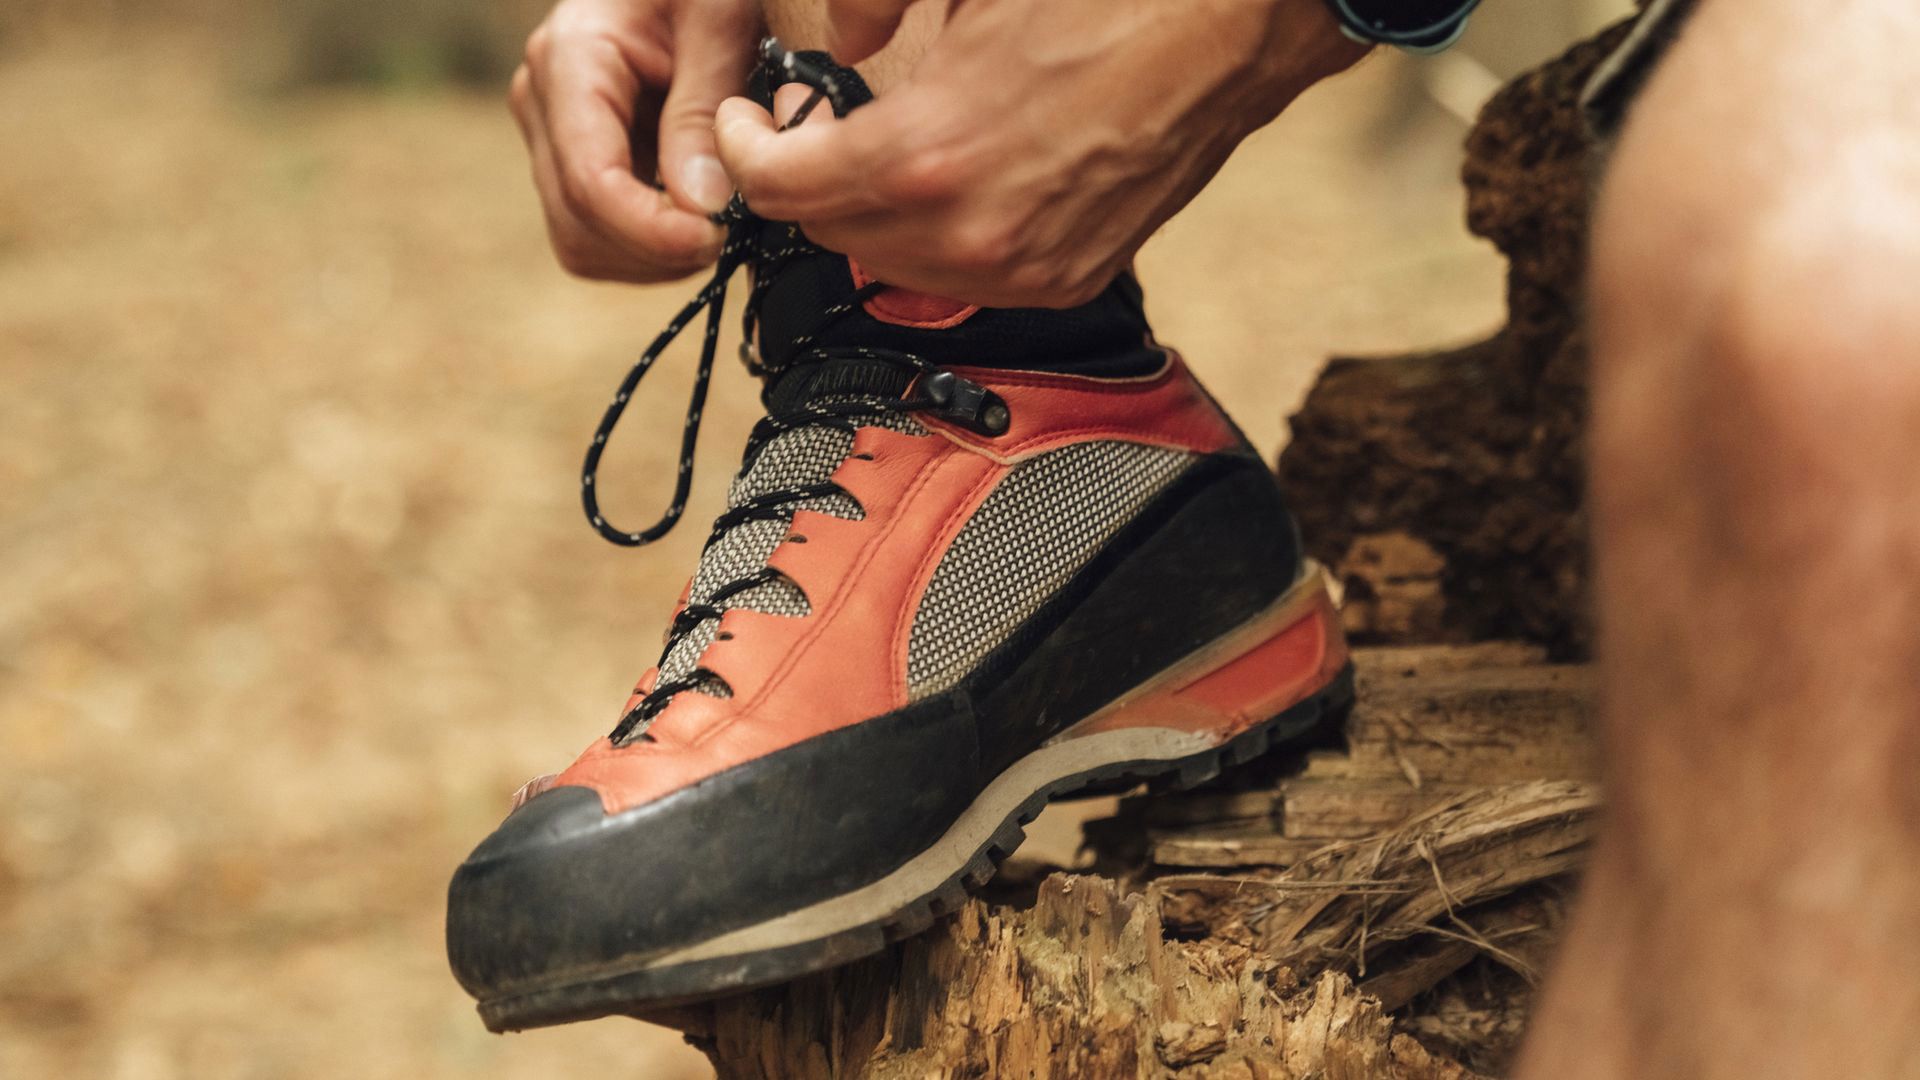 How to tie hiking boots: top tips for increased foot comfort on the trails